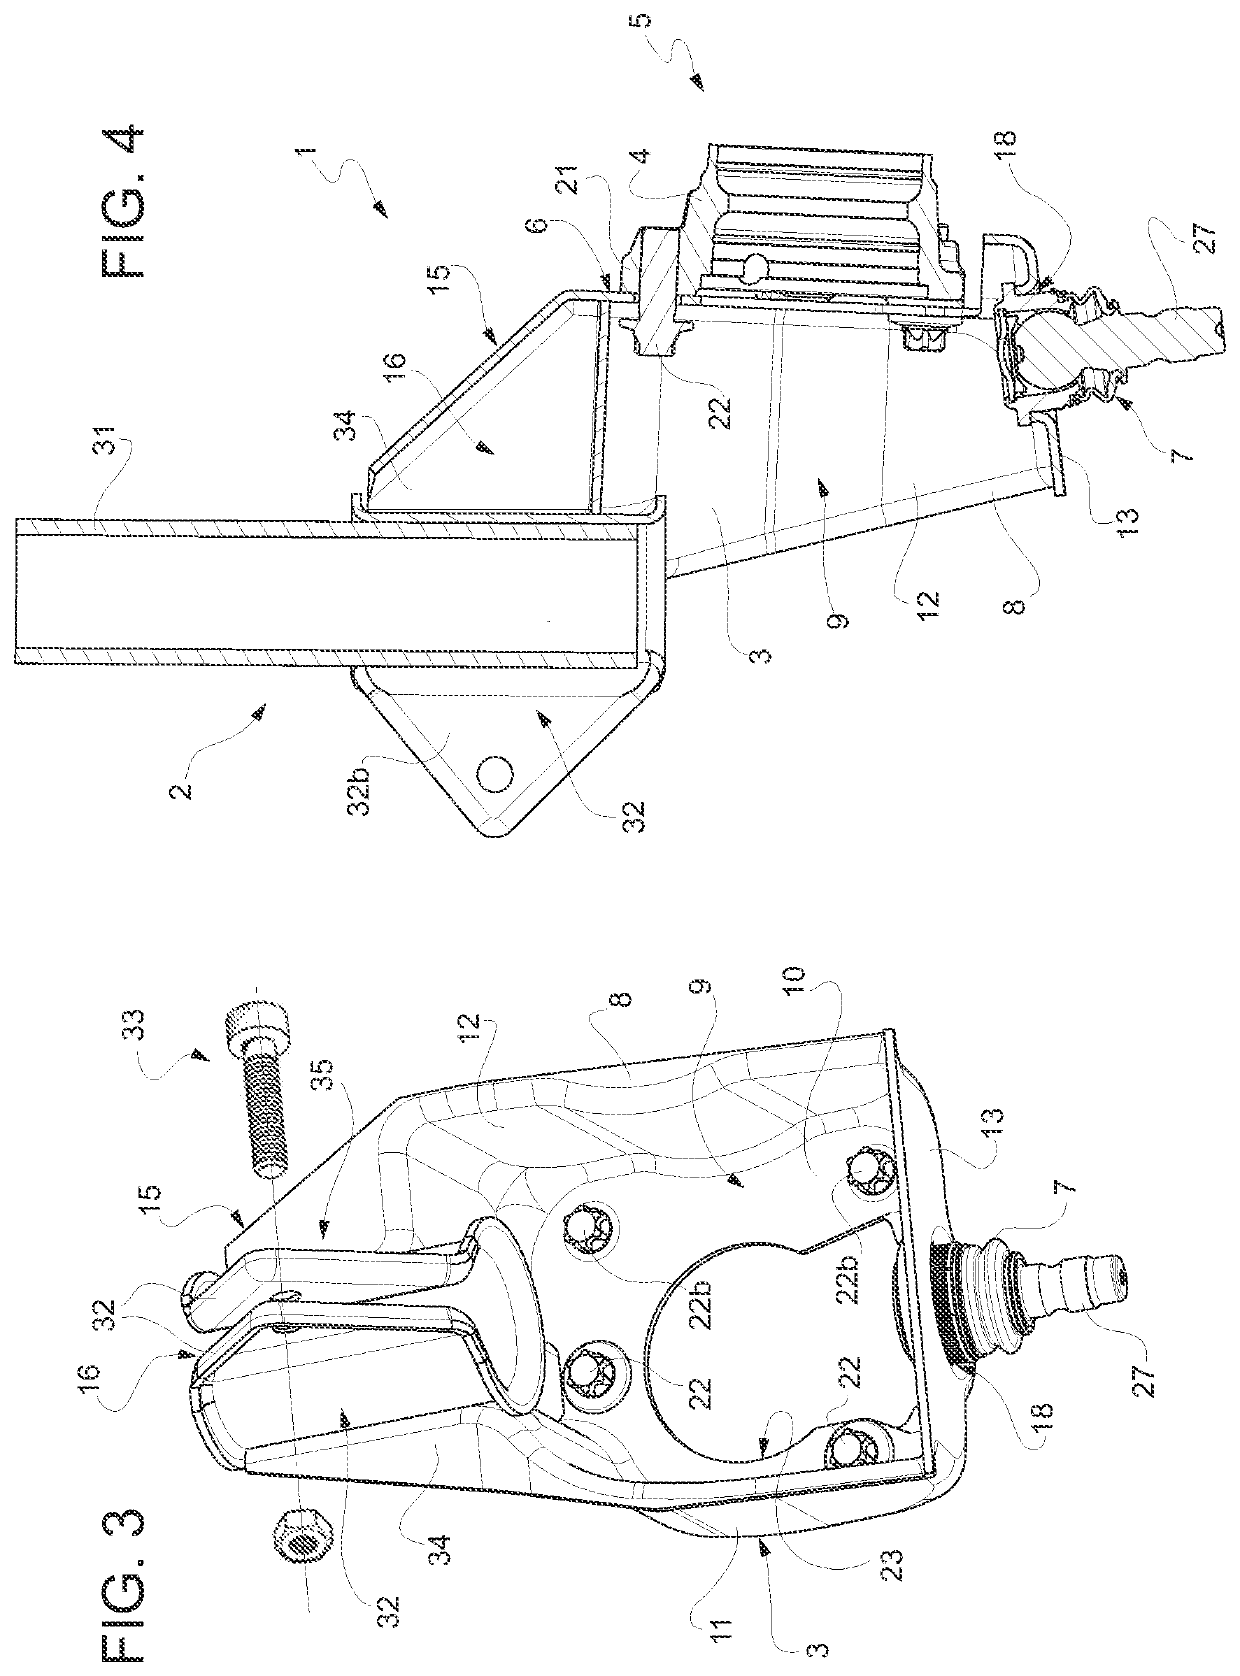 Integrated Steering Suspension Module For A Vehicle